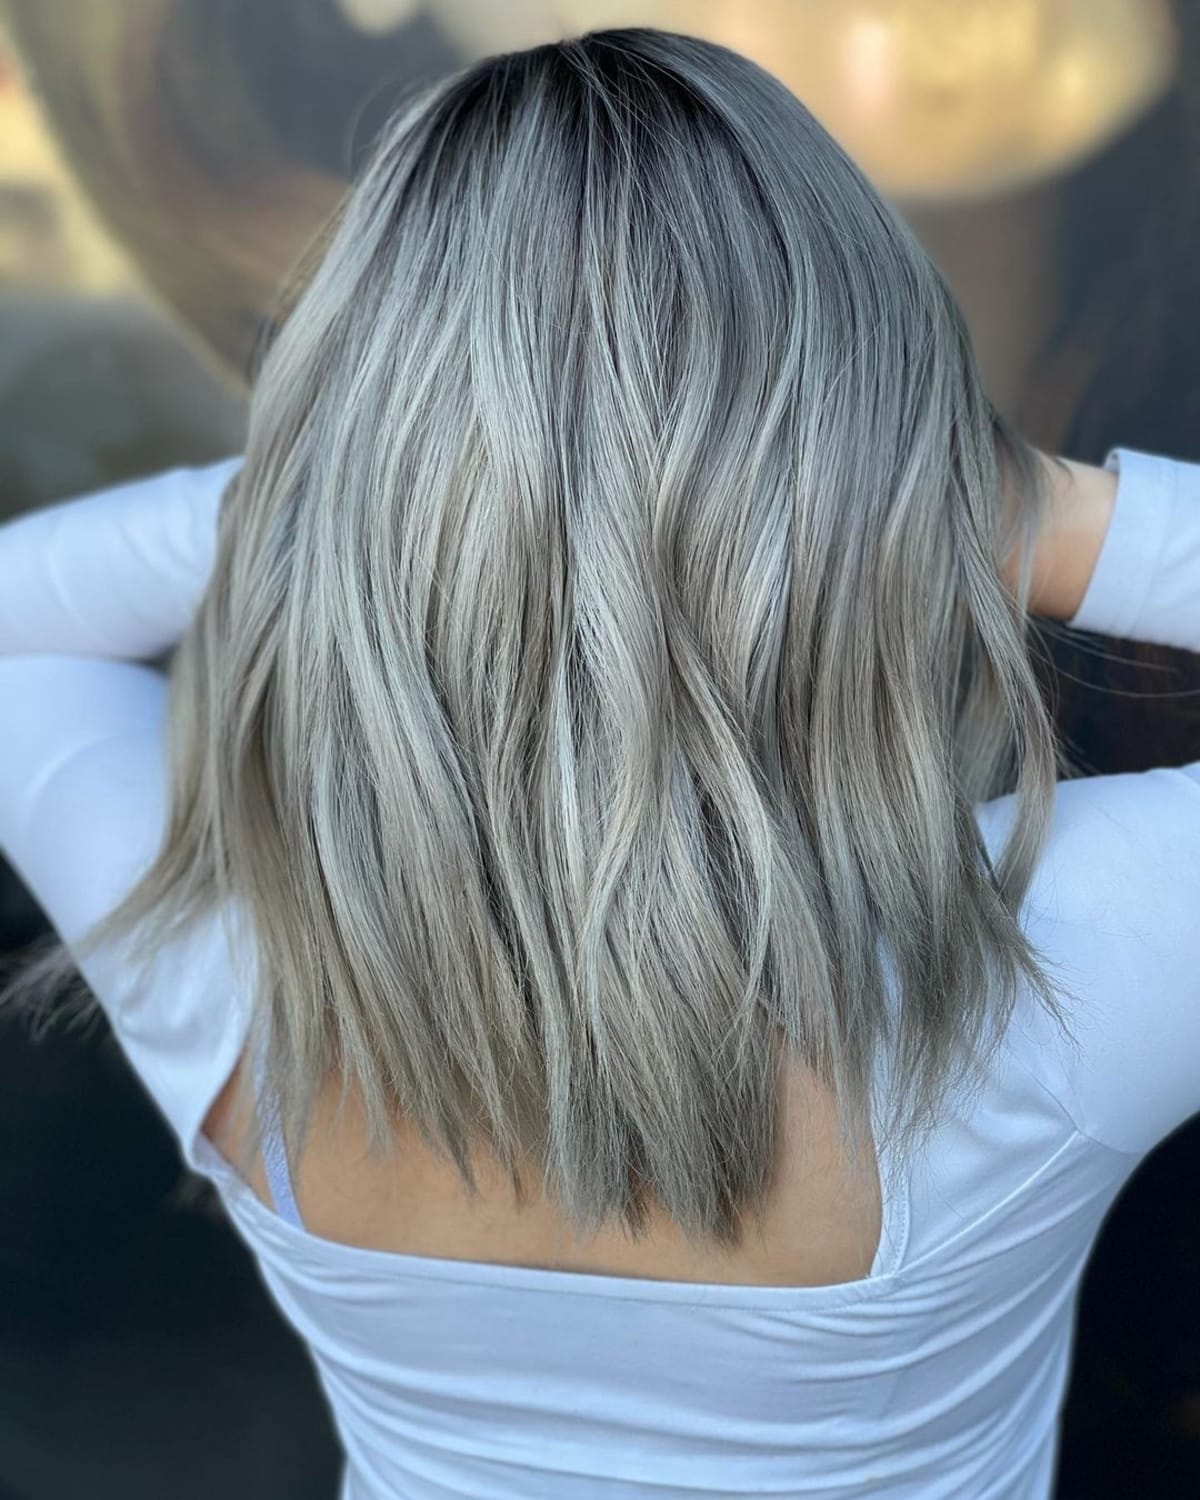 25 Best Ash Blonde Balayage Hair Colors for Every Skin Tone